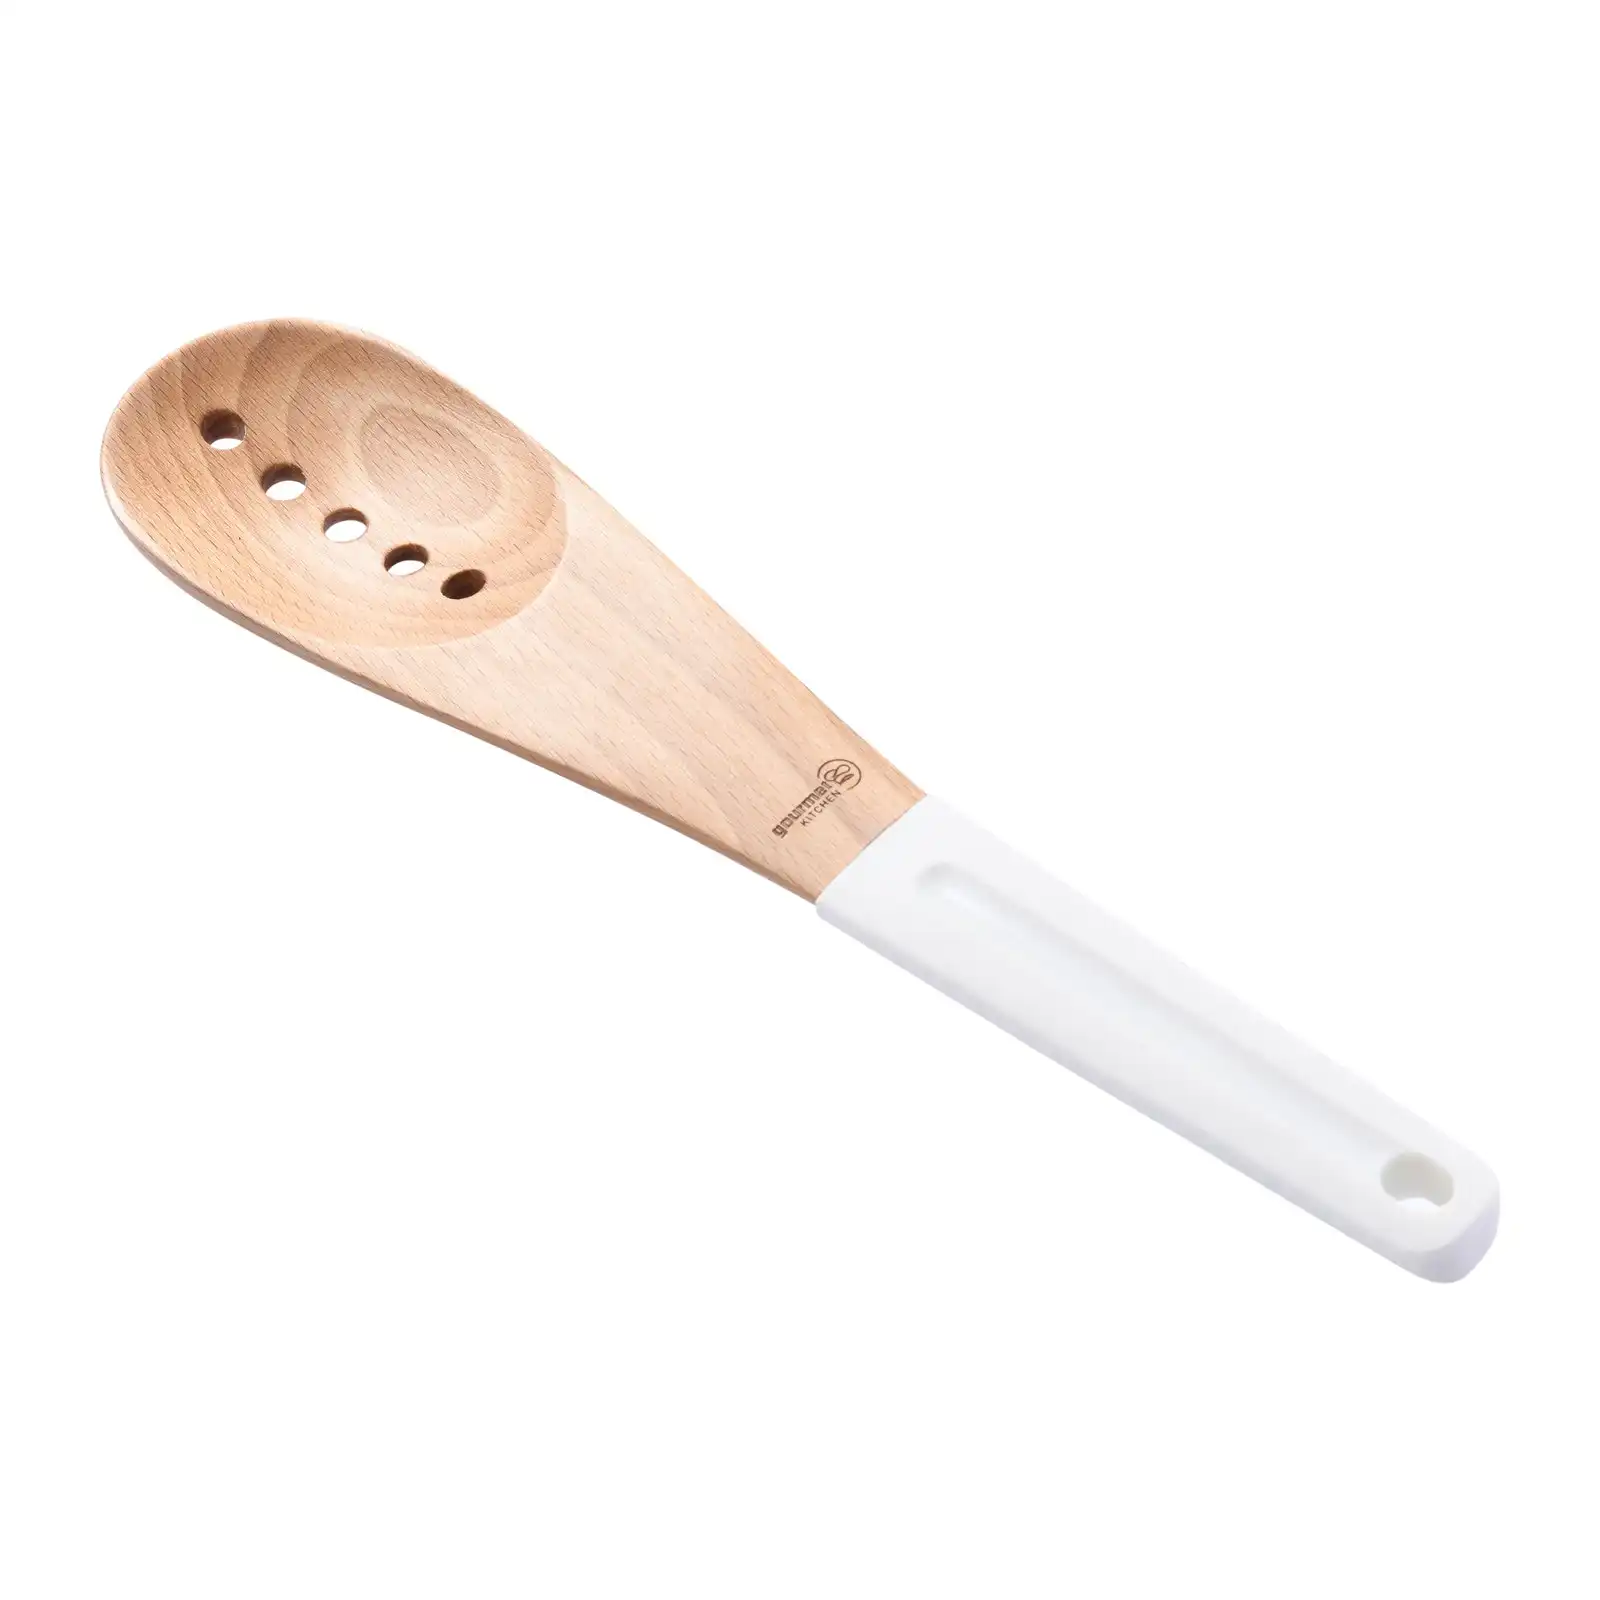 Gourmet Kitchen Rustic Beech Wood Slotted Spoon with Silicone Grip White 30x6.5x1.5cm